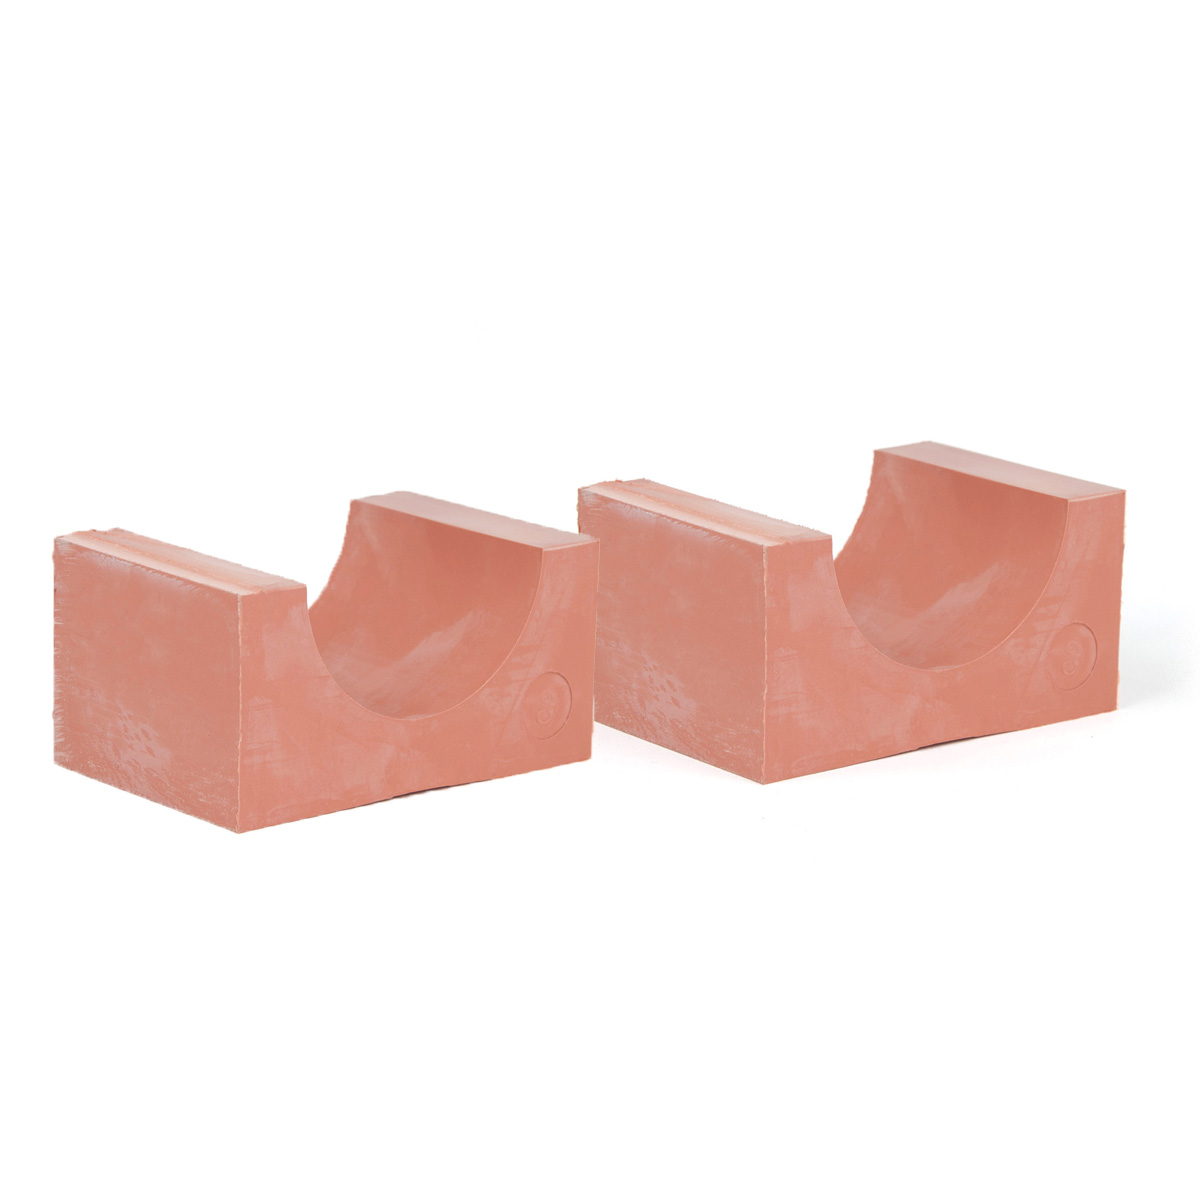 90-60*2 Set of 2 half insert block lycron, 90-60 for cable/pipe diam. 59.5-61.5mm